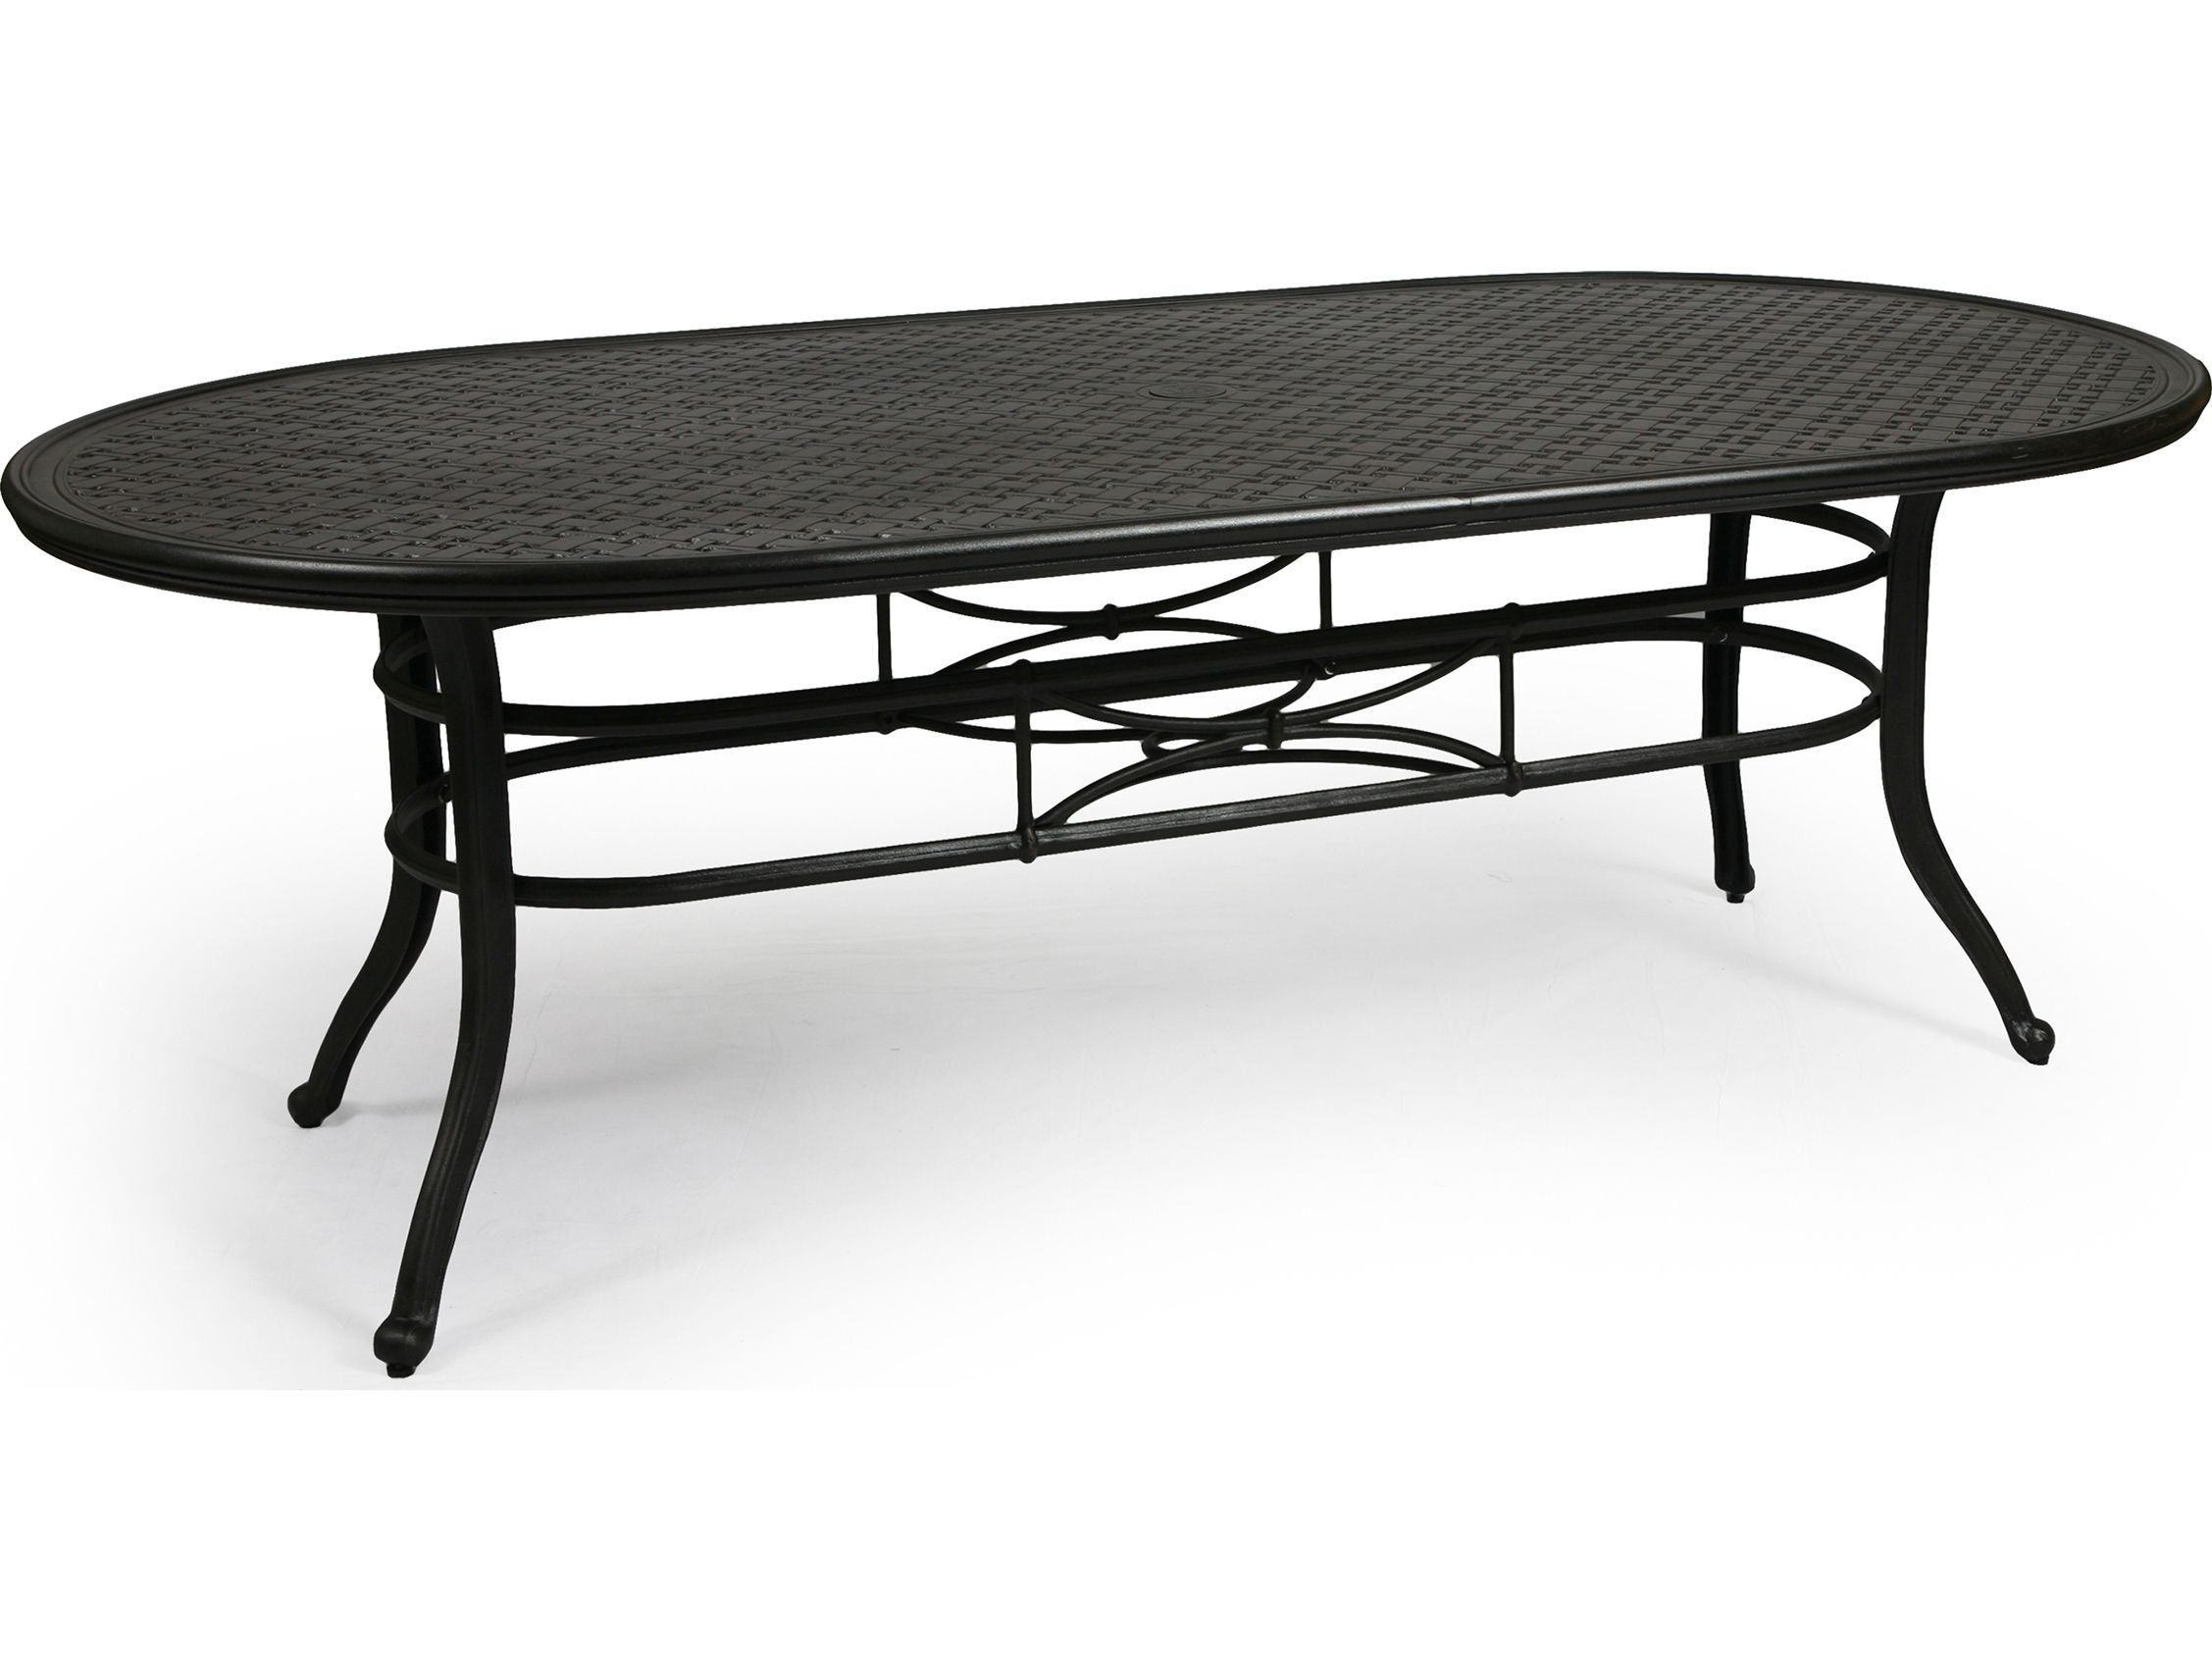 Metal Oval Outdoor Tables With Best And Newest Mallin Napa 9000 Series Cast Aluminum 84.25'' W X  (View 7 of 15)